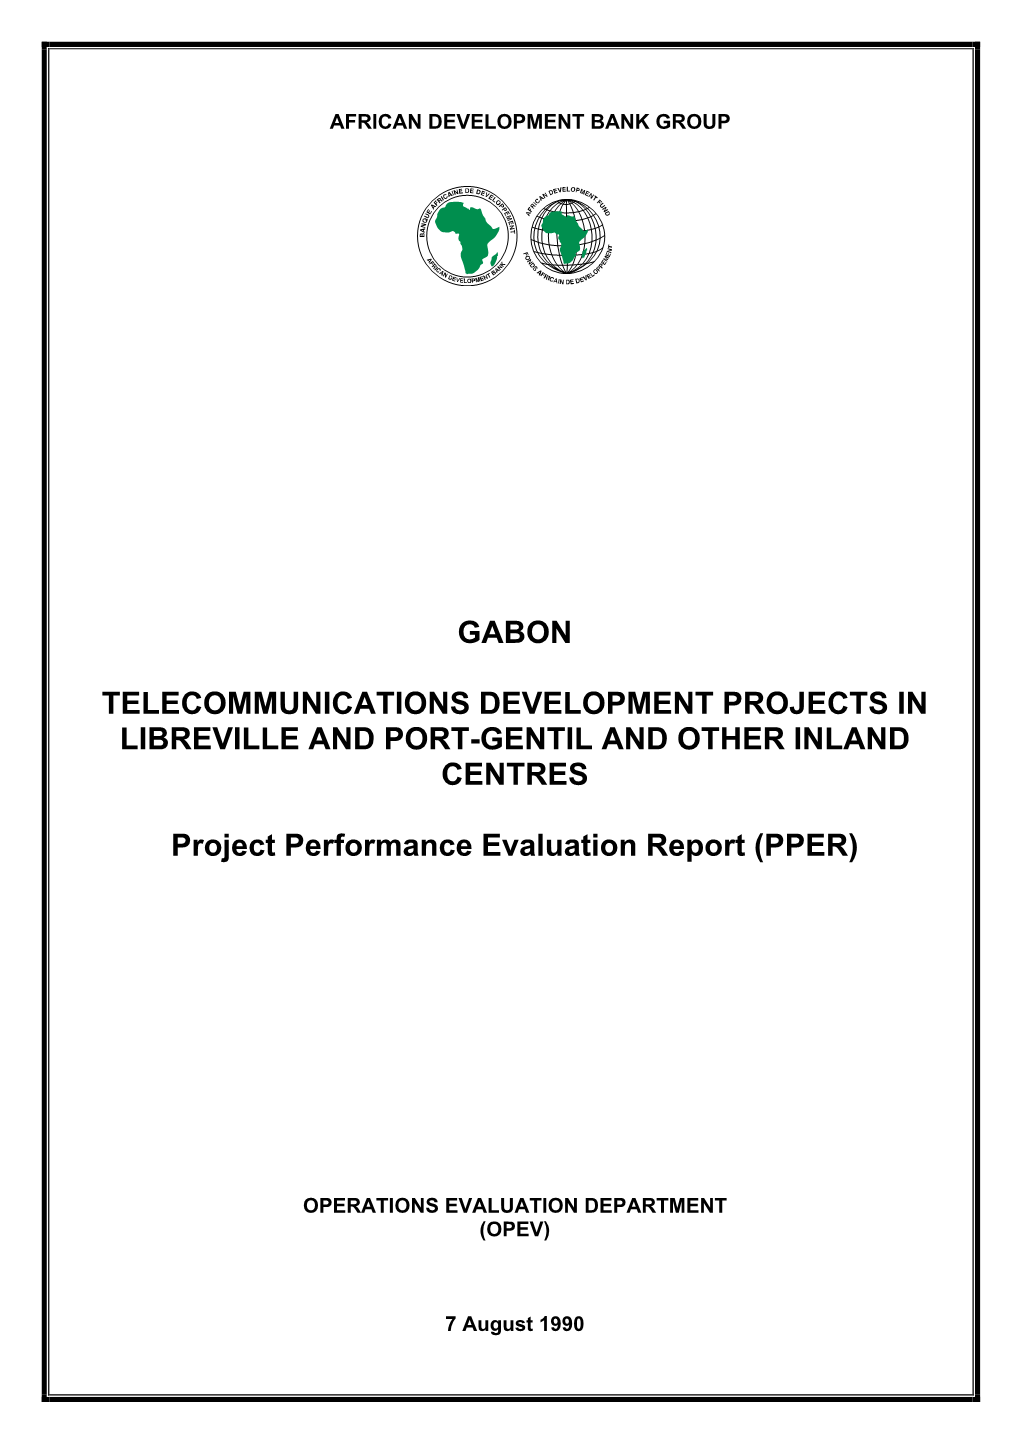 Gabon: Telecommunication Development Project on Liberville and Port Gentil and 8 Other Inland Centres